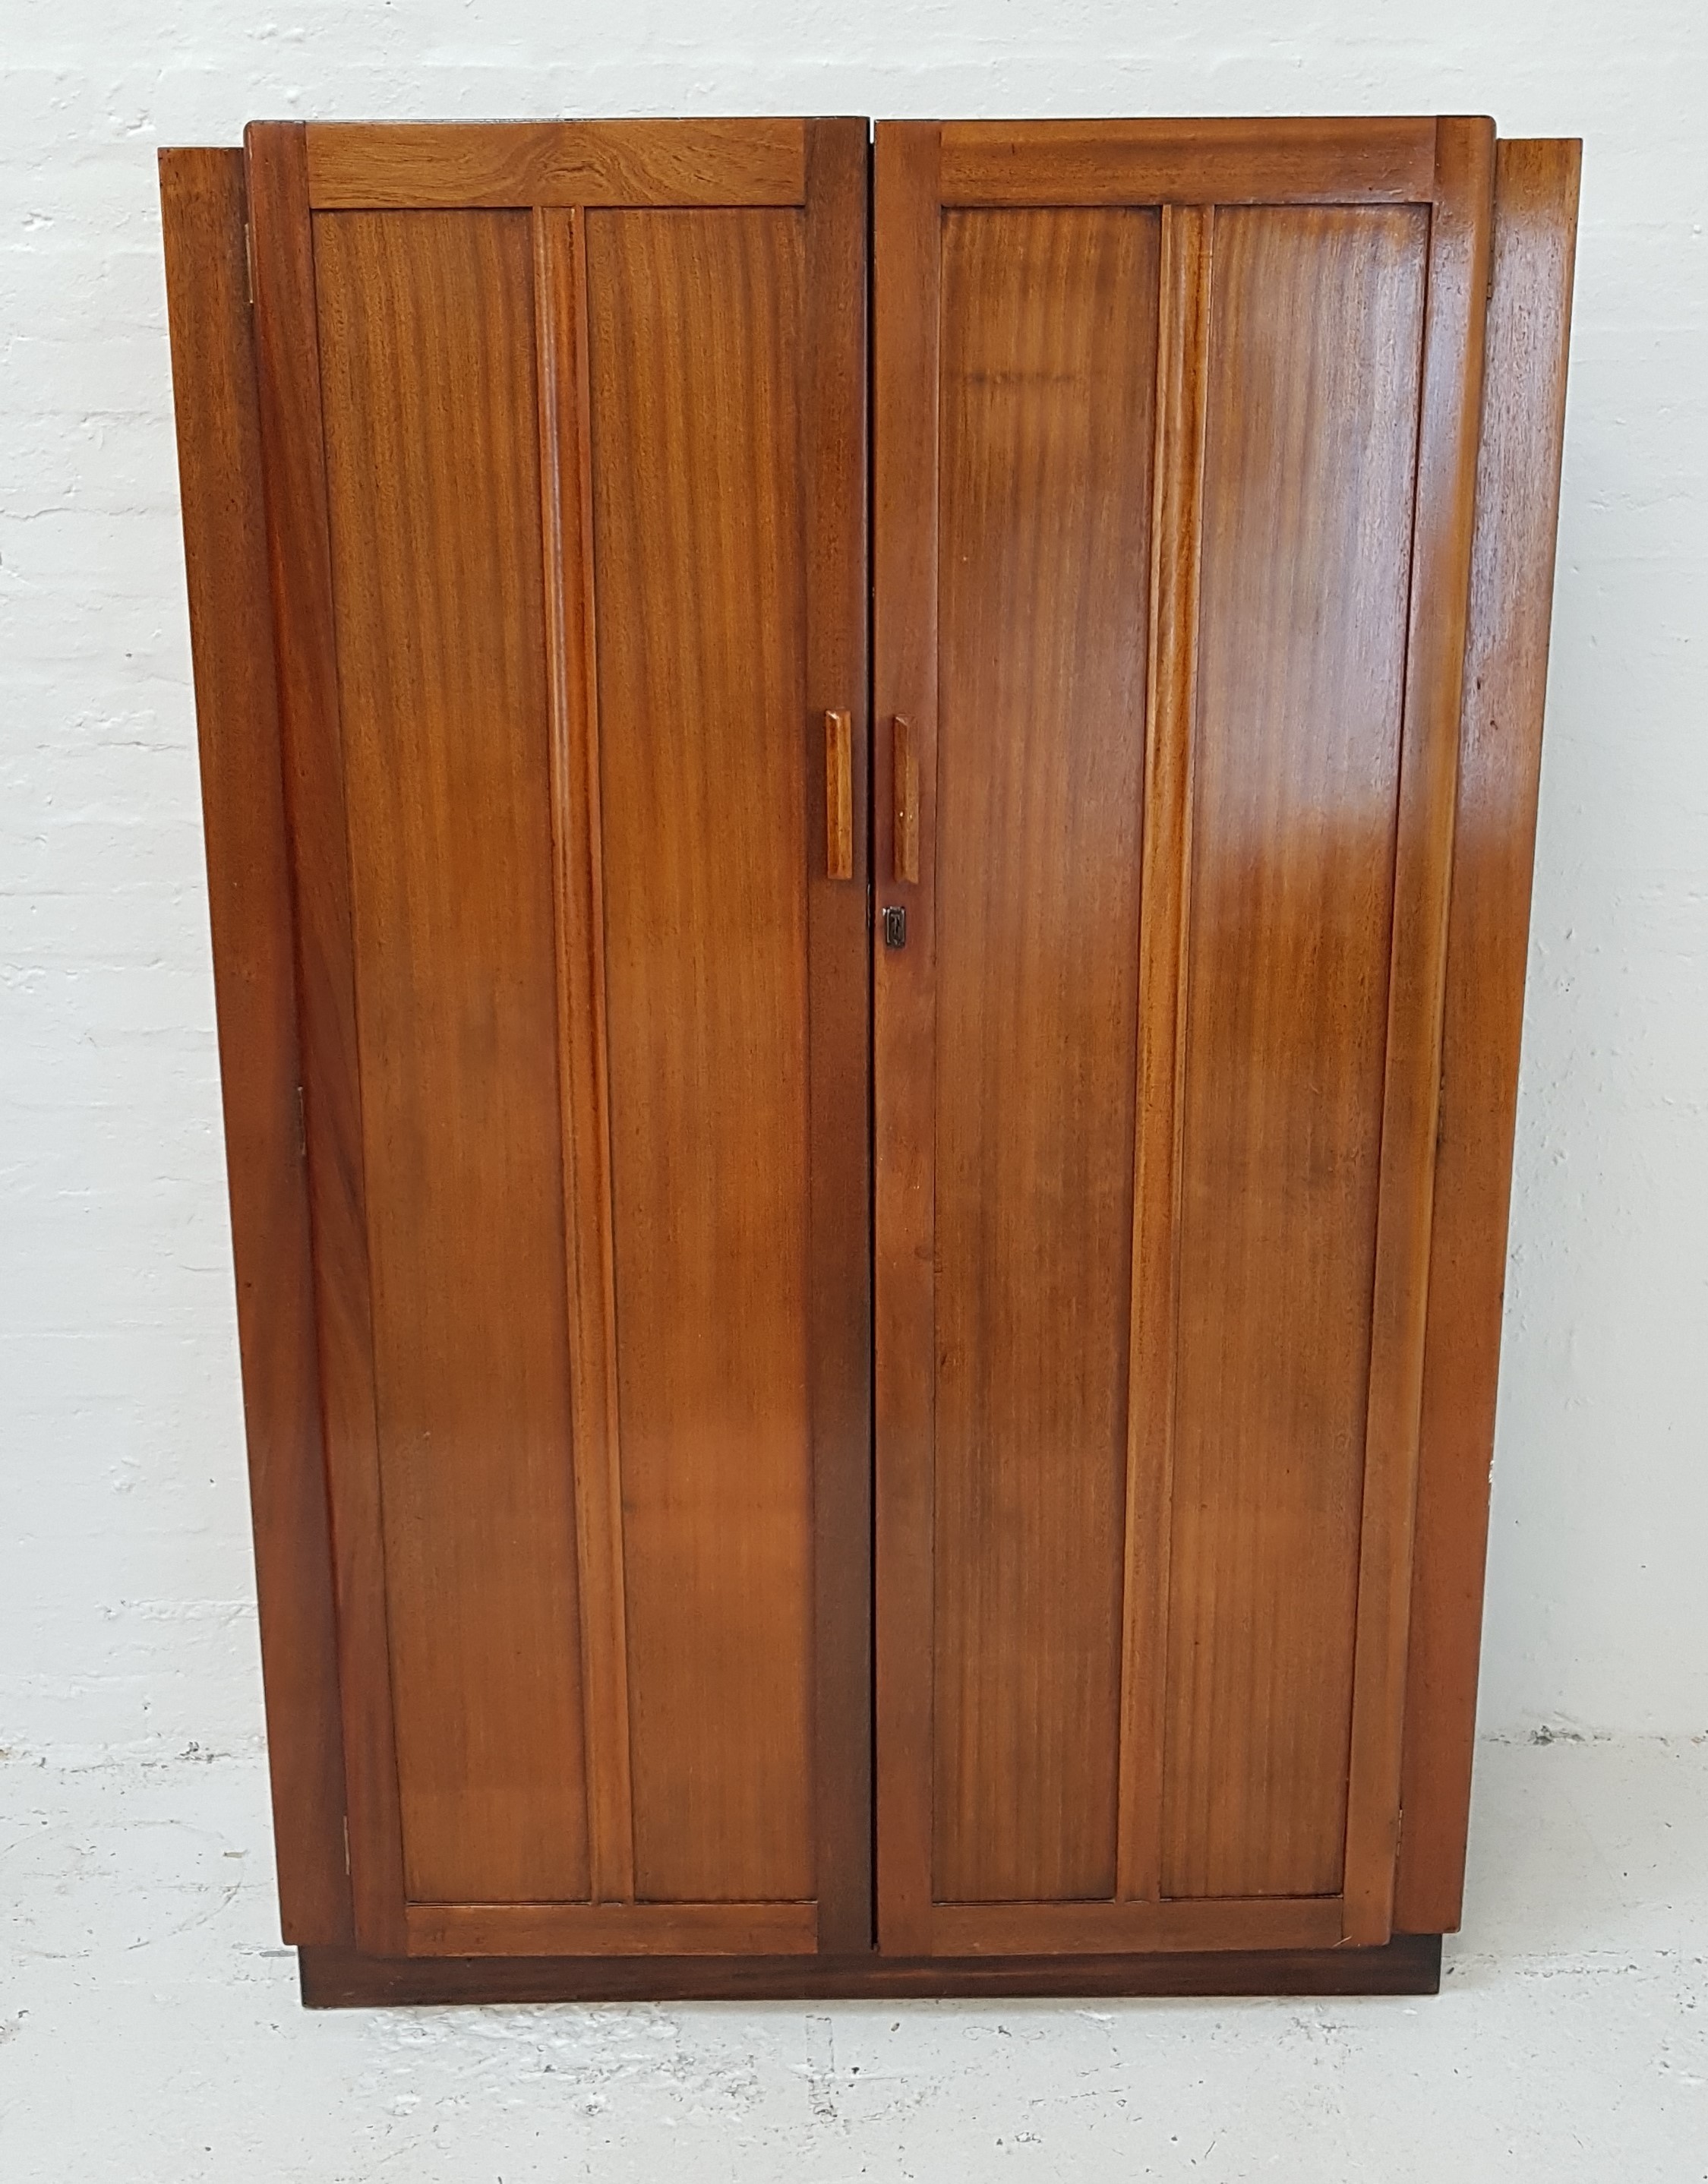 1930s TEAK WARDROBE with a pair of panelled doors opening to reveal an internal mirror and hanging